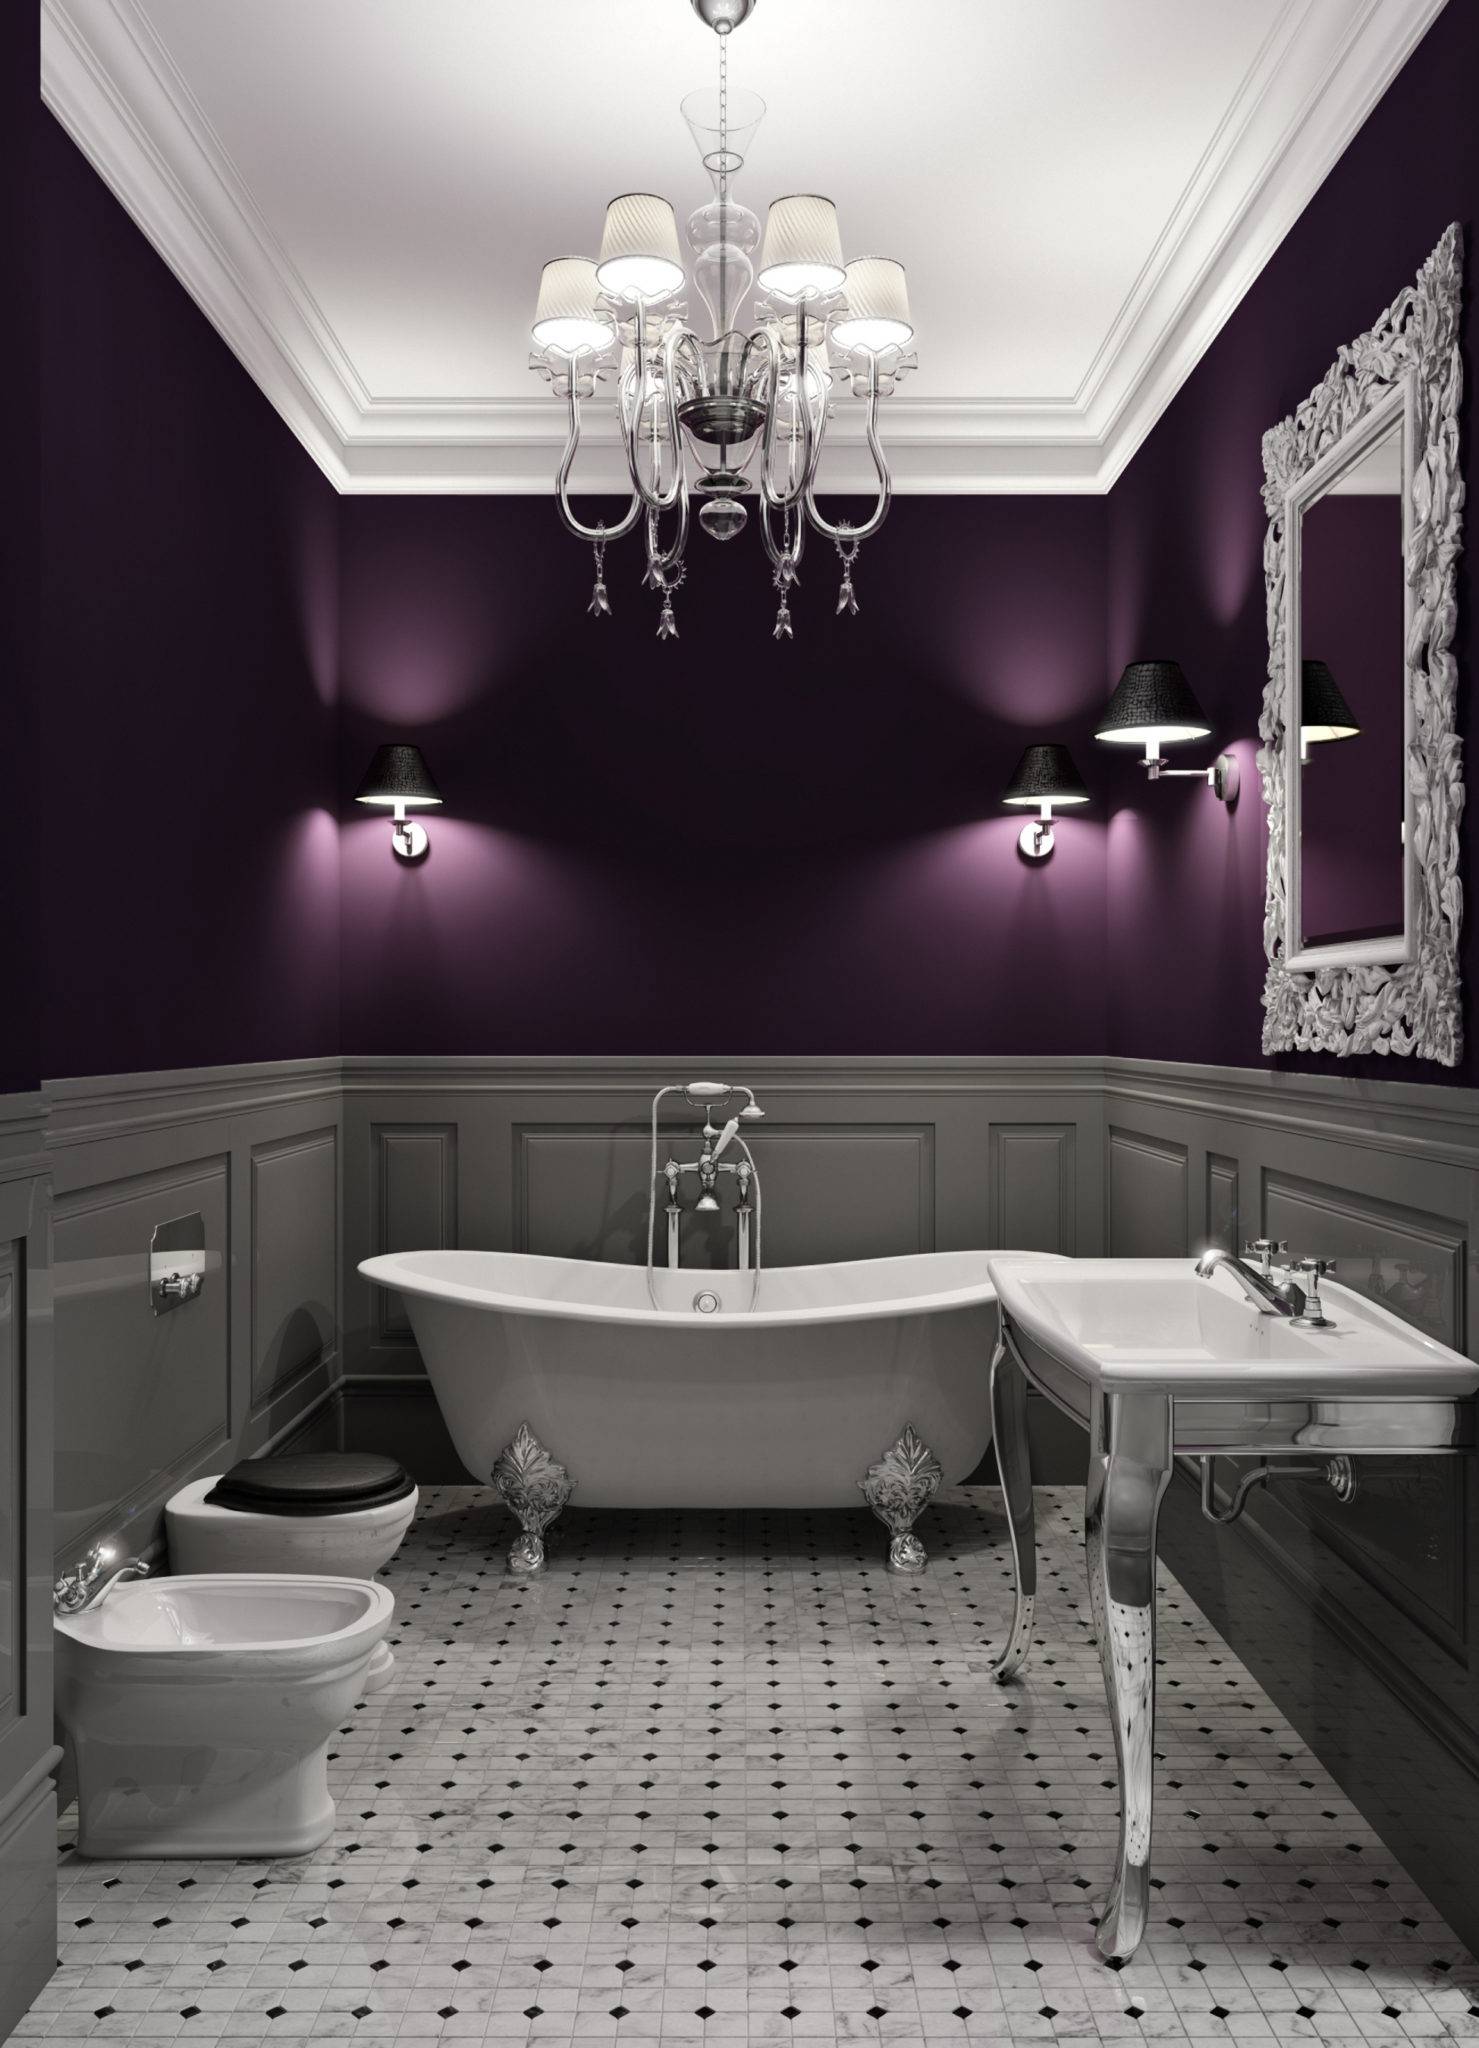 Elegant Bathroom With Chandelier And Purple Wall With Grey Wainscoting 25892 1479x2048 